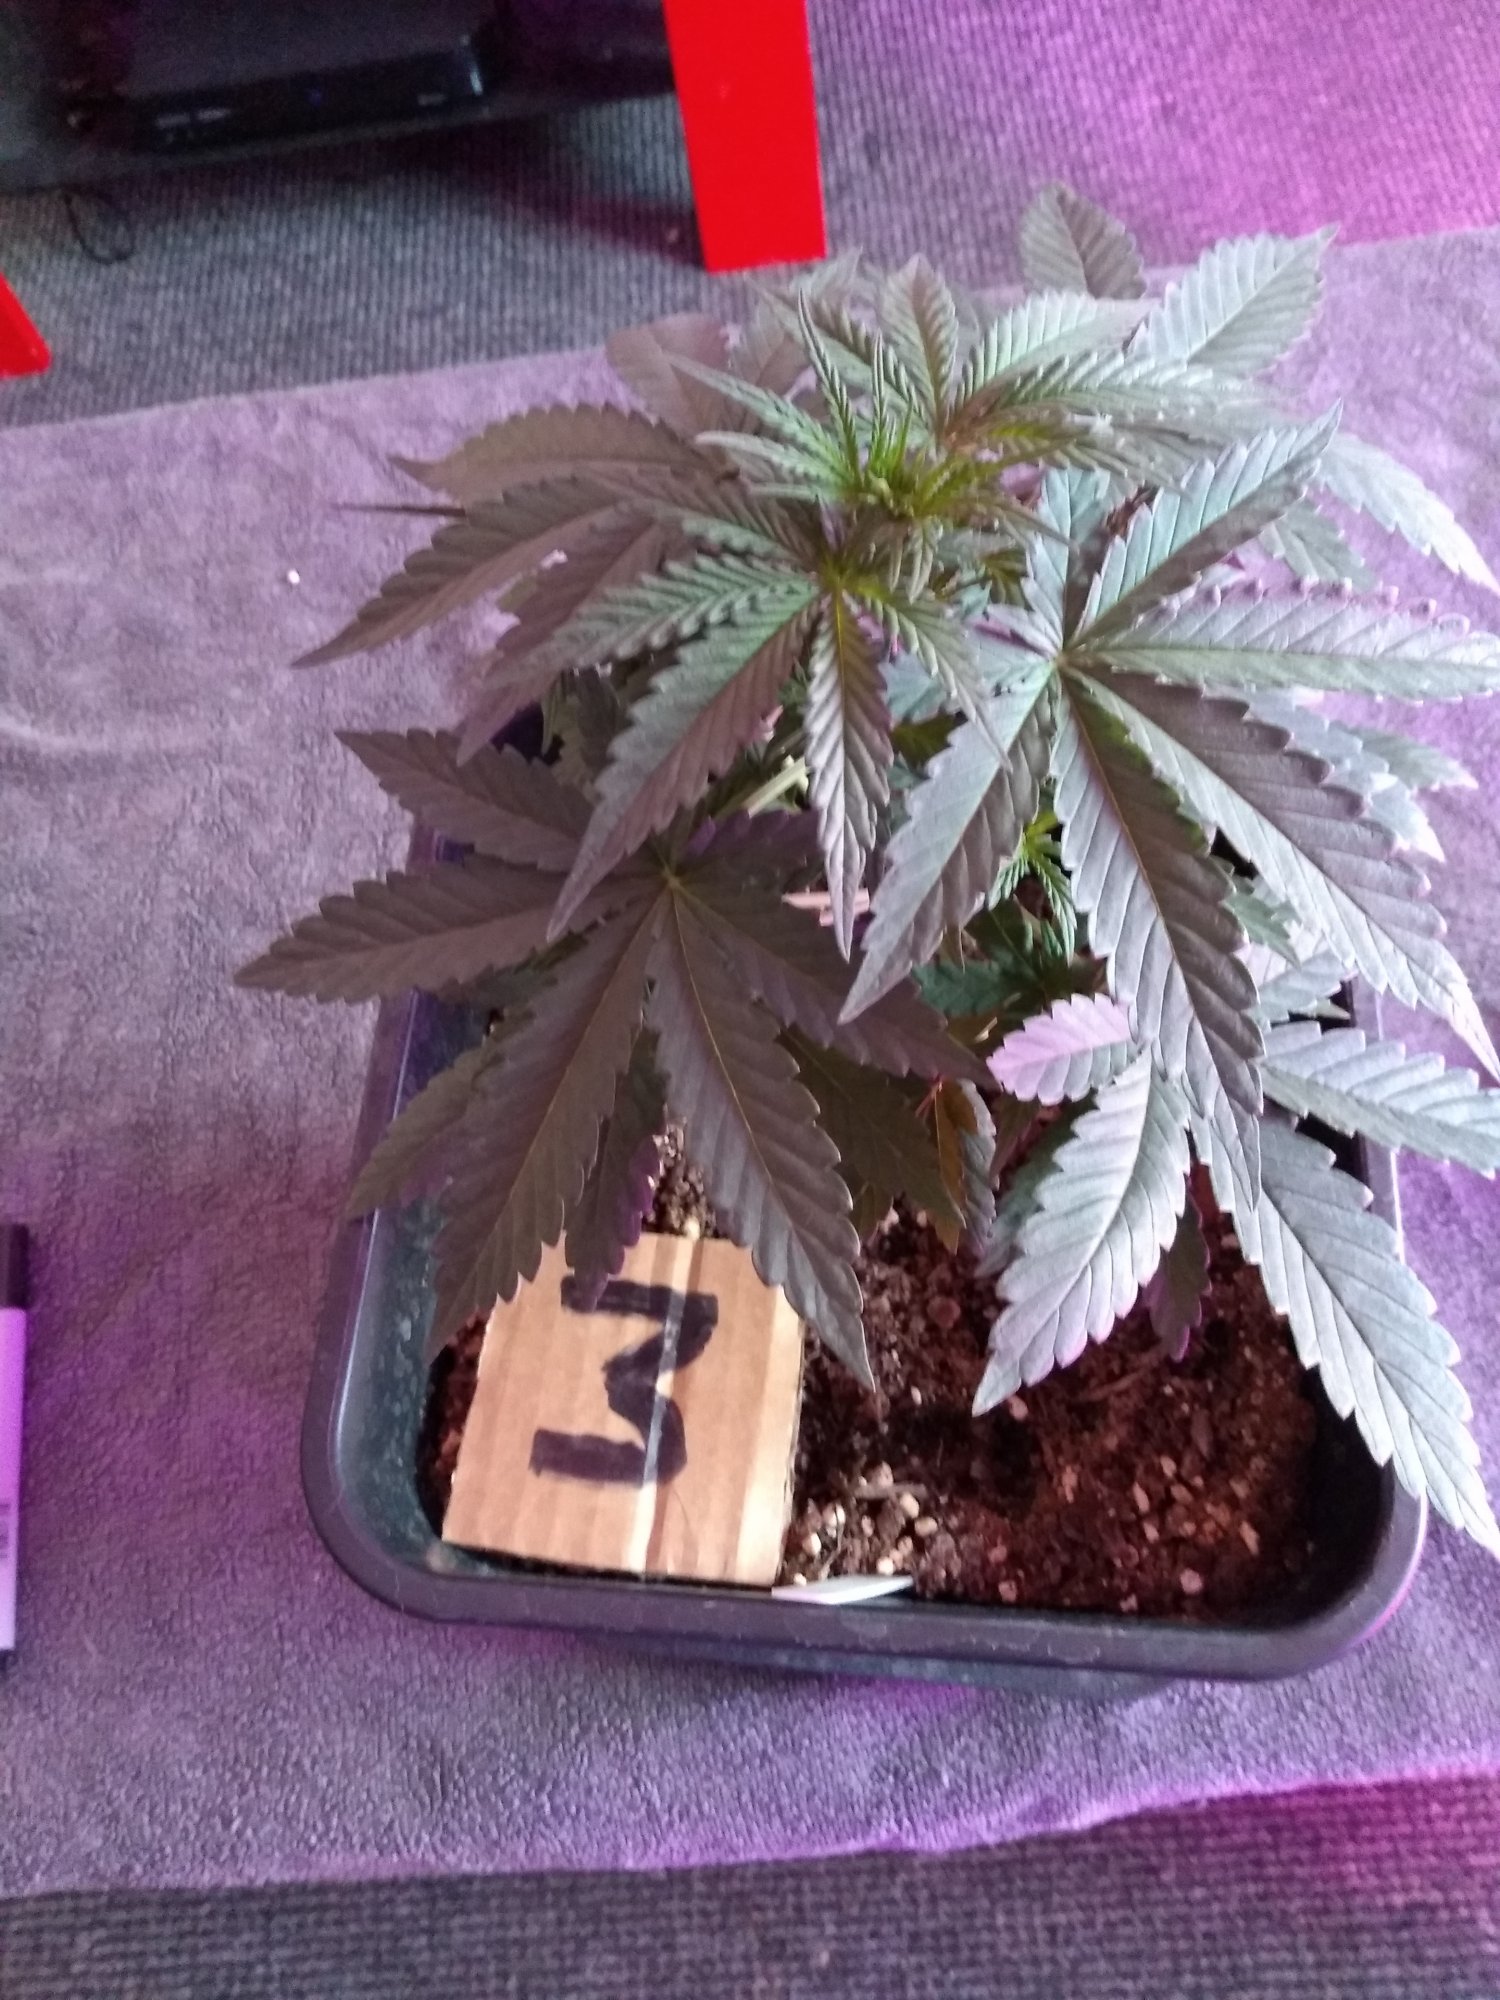 New grower   mistakes have been made 13